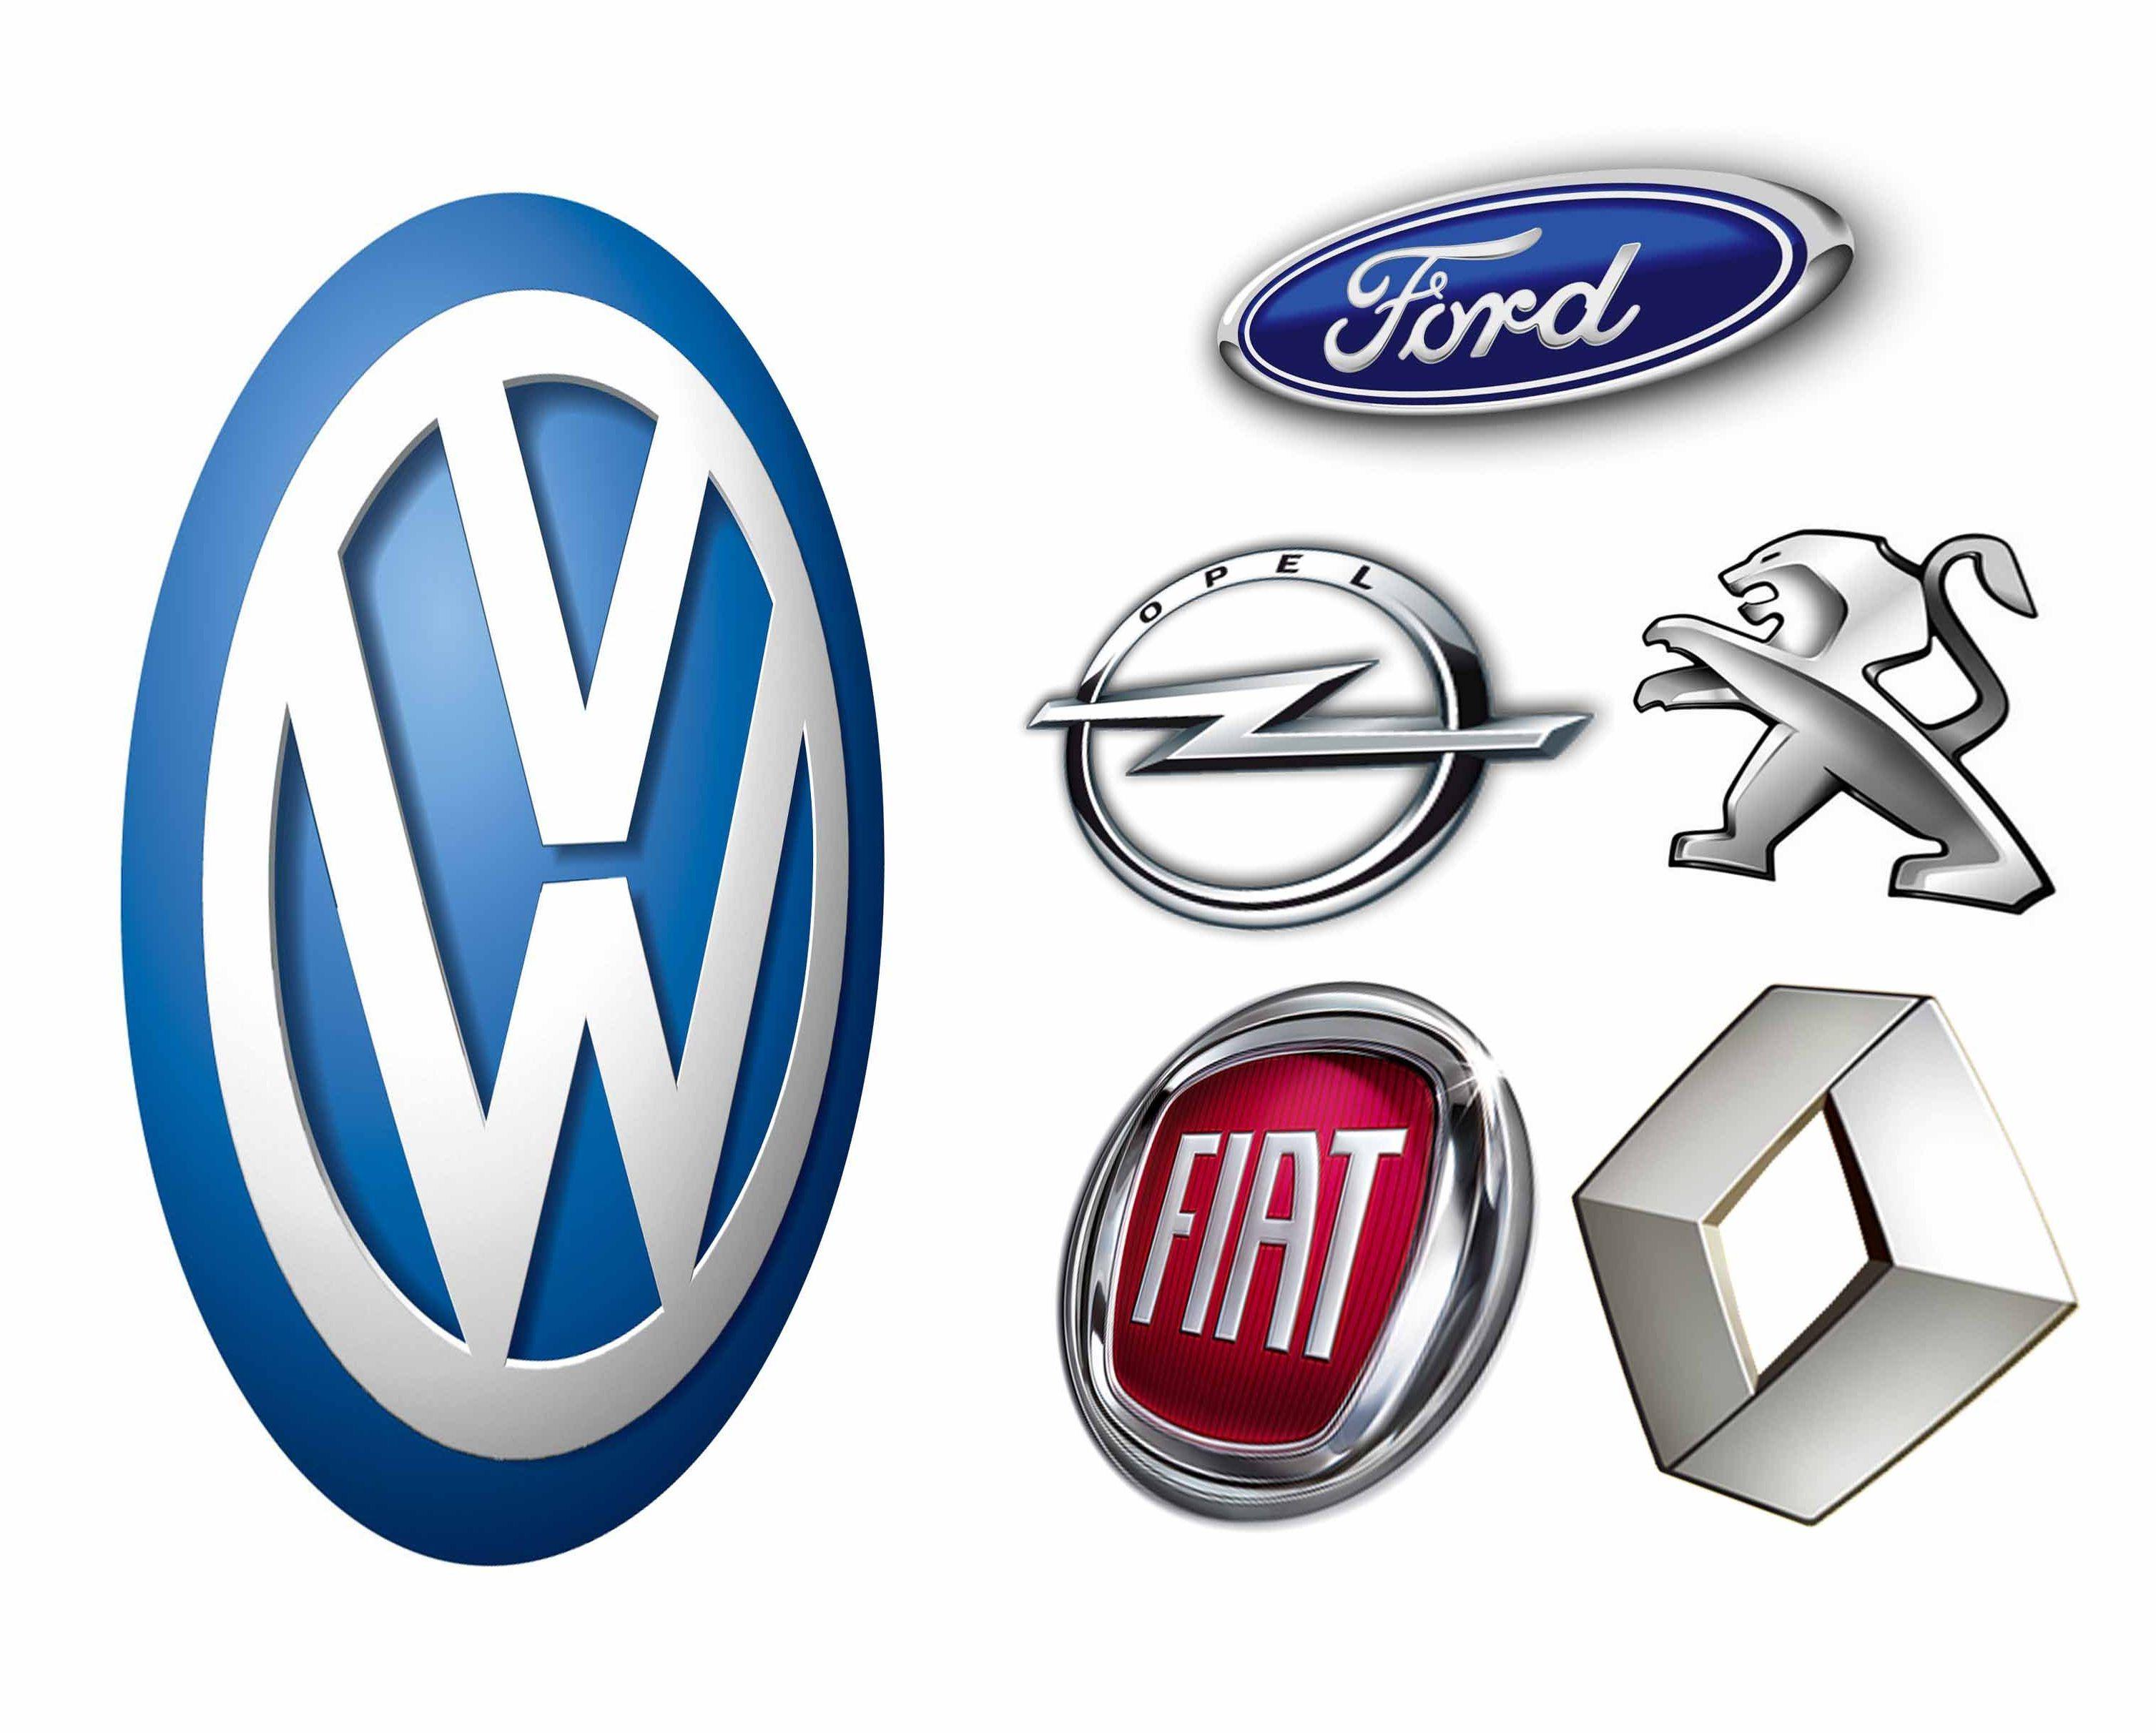 European Car Manufacturers Logo - European car industry crisis. A possible solution? | Fiat Group's World